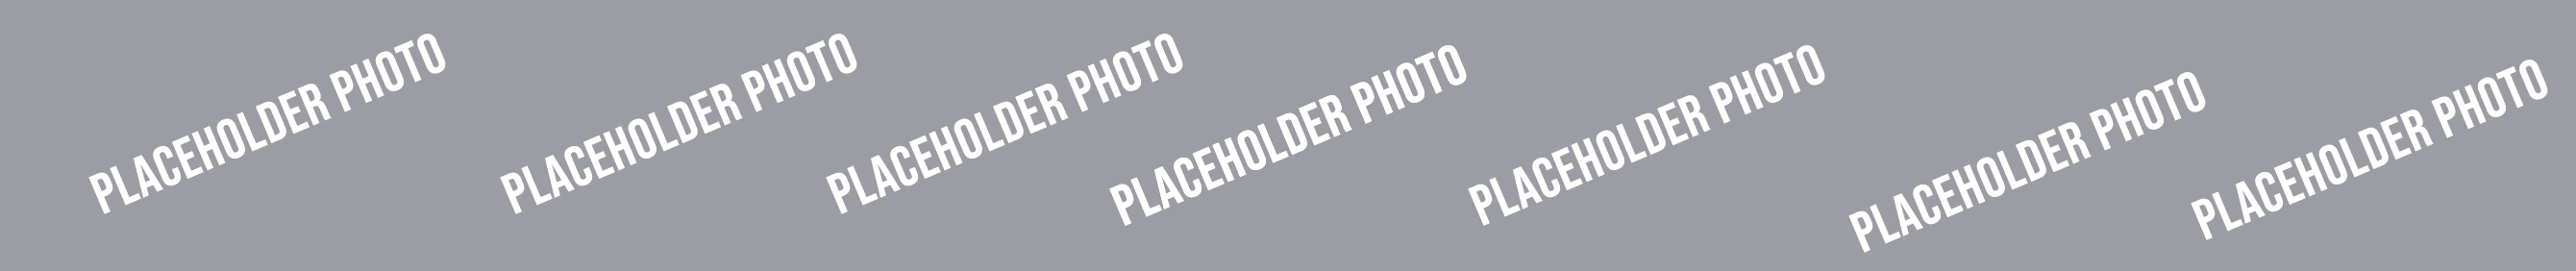 2560x Placeholder photo